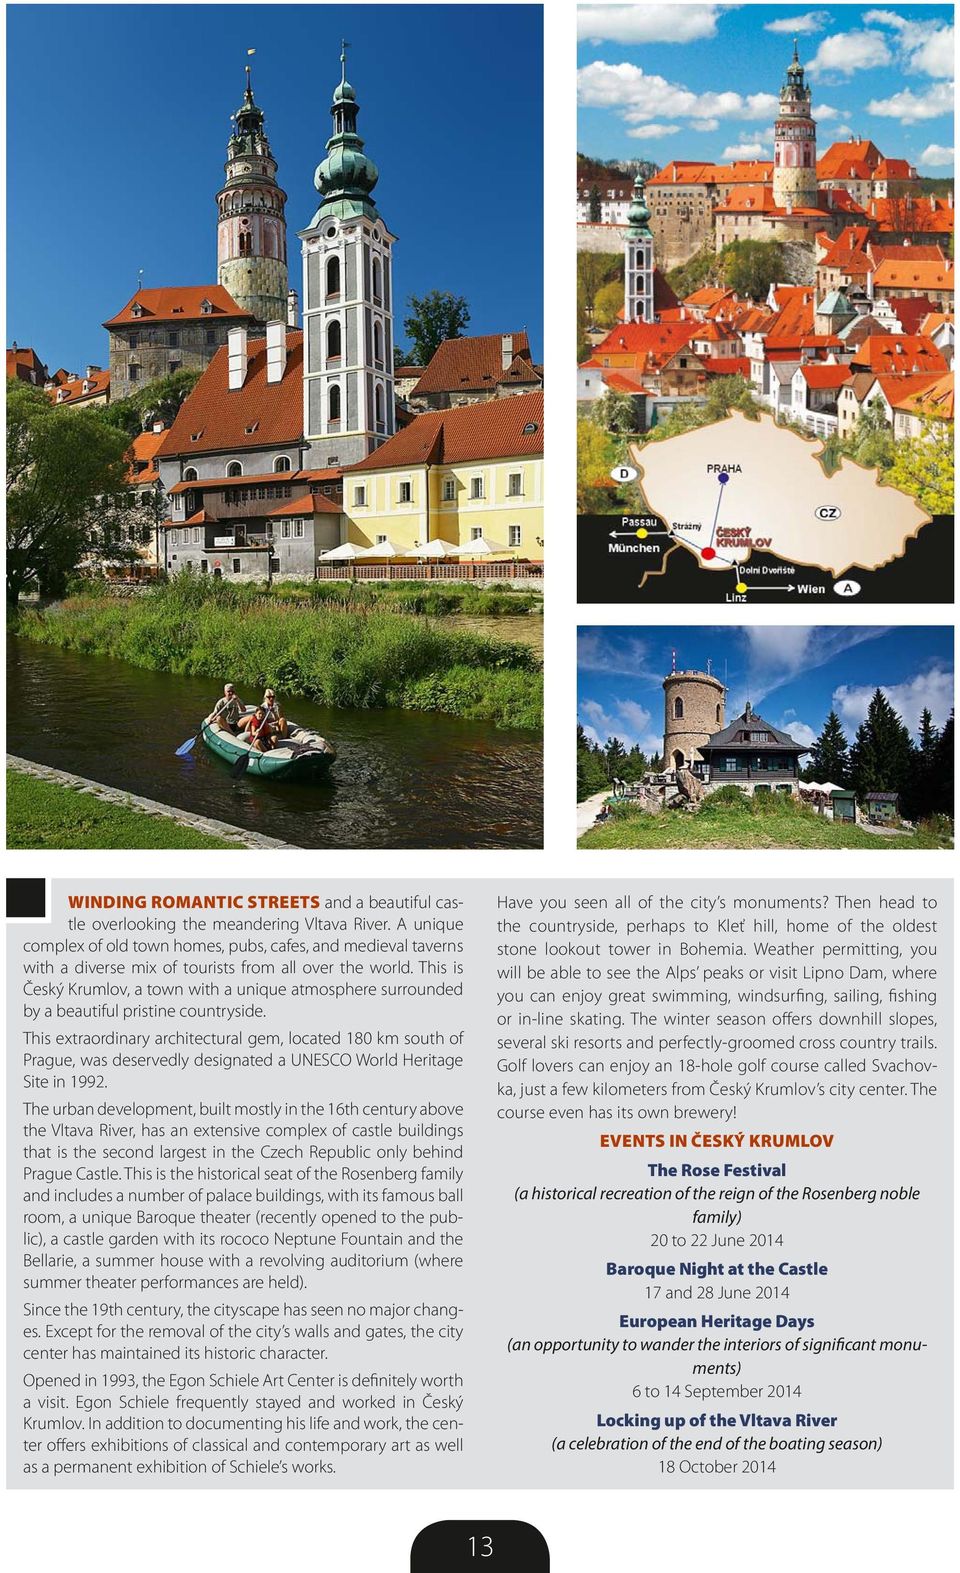 This is Český Krumlov, a town with a unique atmosphere surrounded by a beautiful pristine countryside.